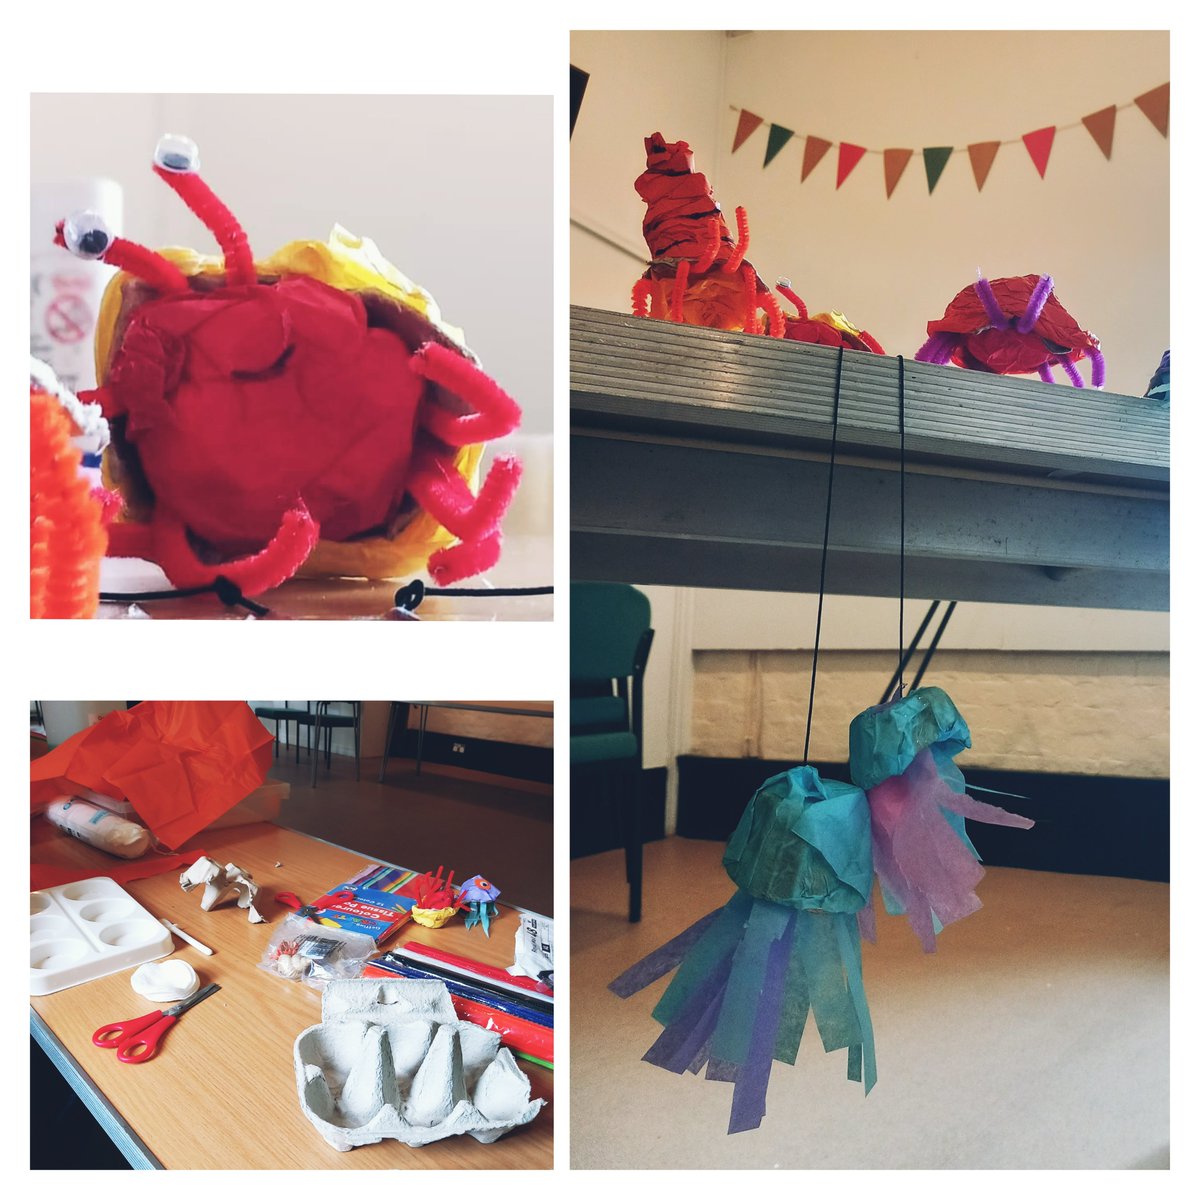 Our Natural History team have been having fun creating free activities (hermit crabs and mini jellyfish) ready for our Coastal Awareness Day tomorrow 🐚🦀🪼 @PortsCityMuseum 10-4 (tomorrow 12th August!)🌊